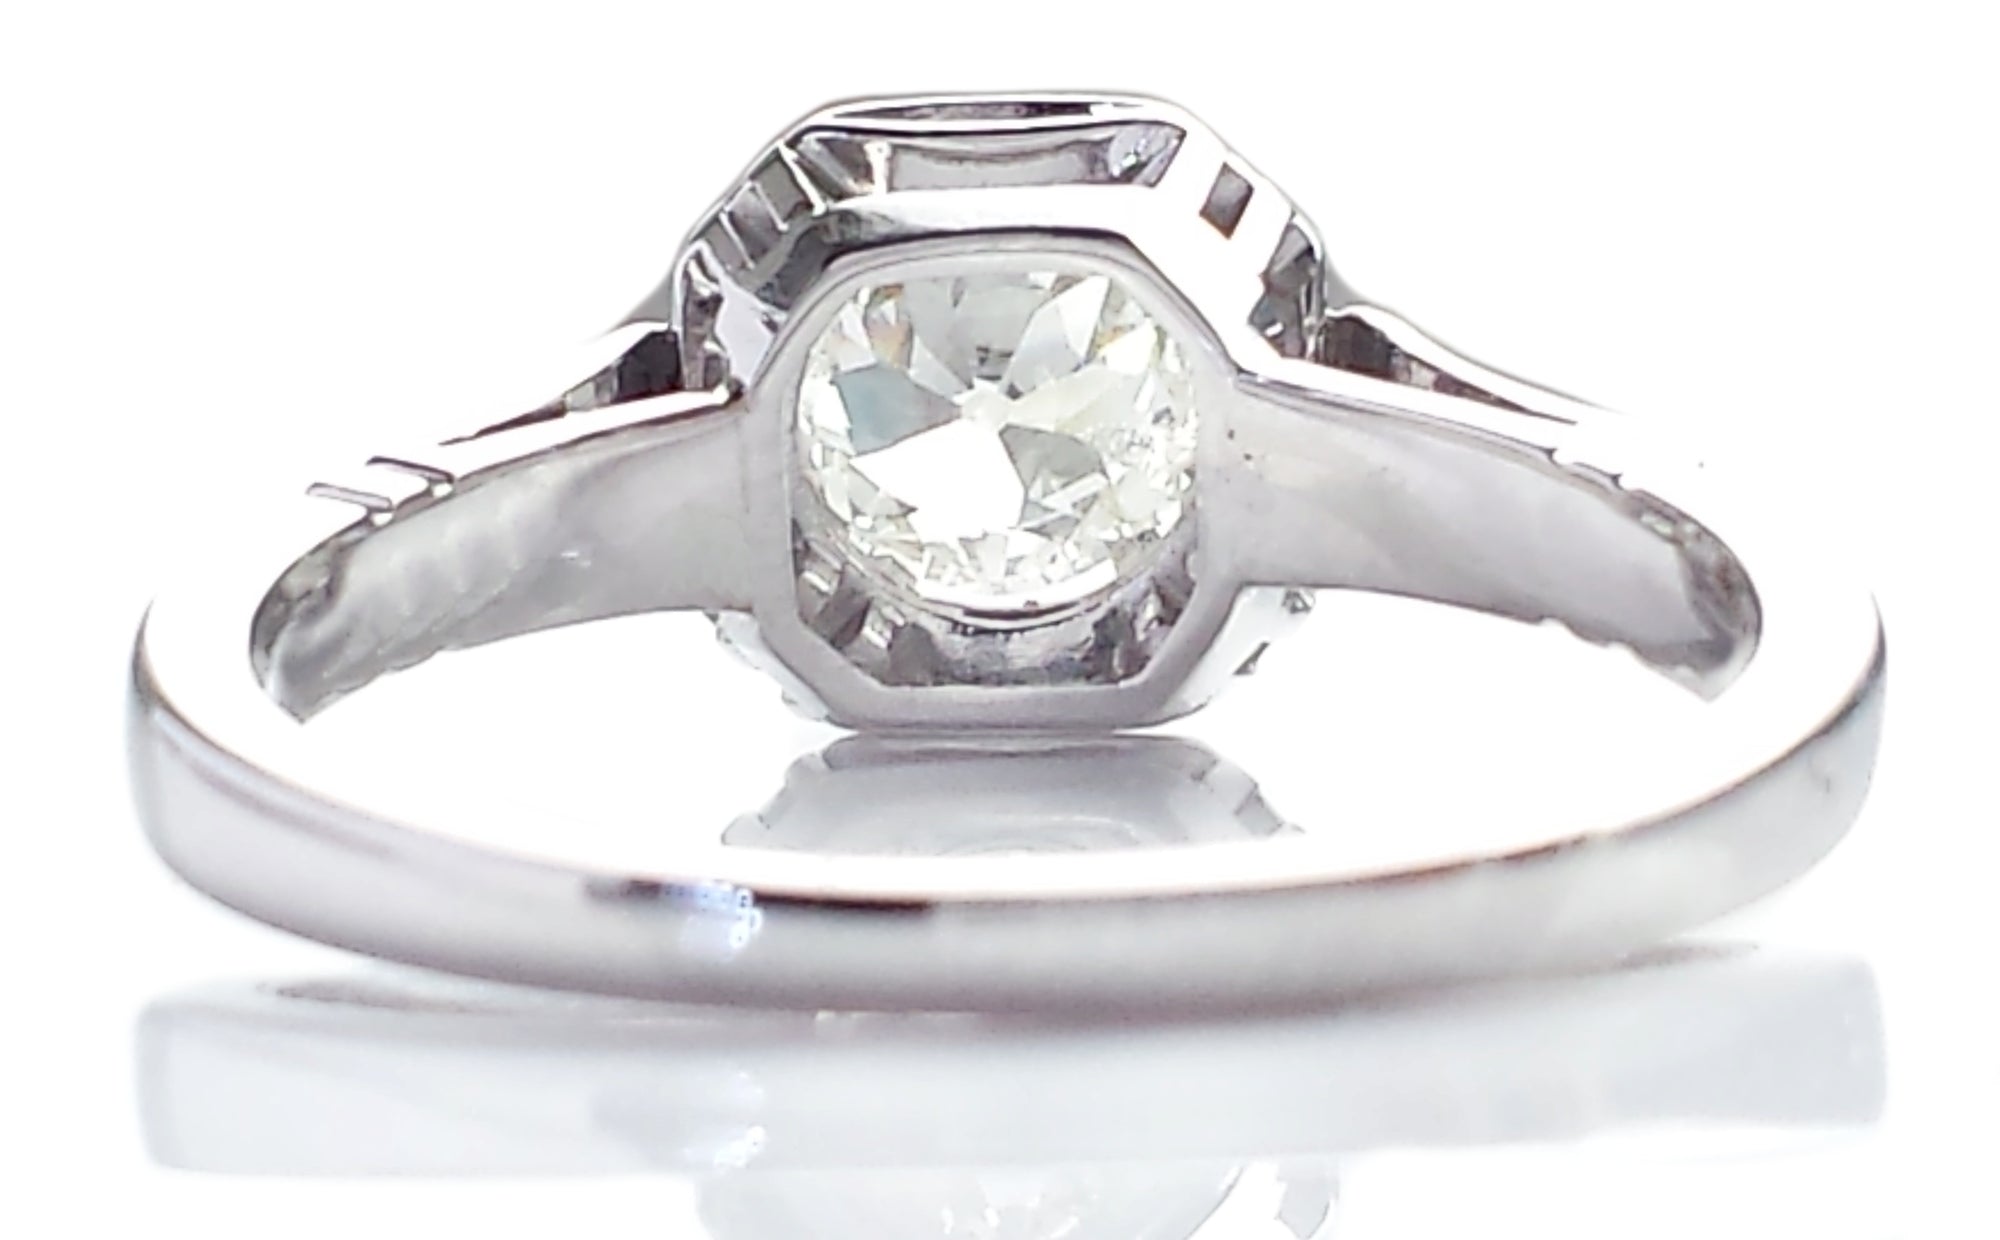 Antique 1920s French 0.92ct H/SI2 Old European Cut Diamond Engagement Ring